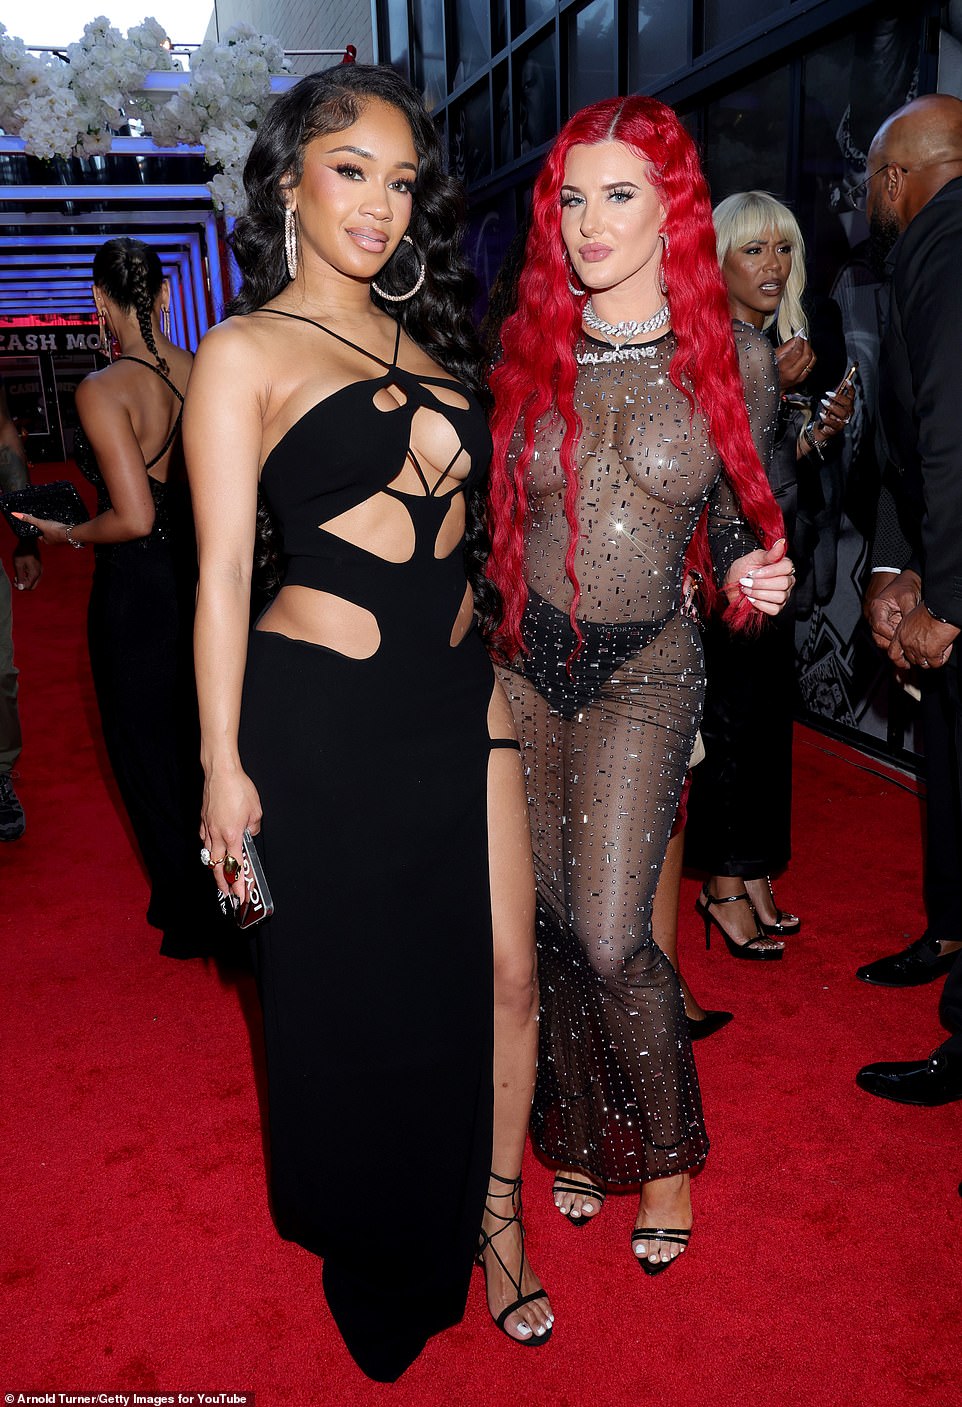 Saweetie (born Diamonté Harper) posed on the red carpet with Wild 'N Out star Justina Valentine (R), who made sure to wear nude pasties and Victoria's Secret panties beneath her embellished mesh dress